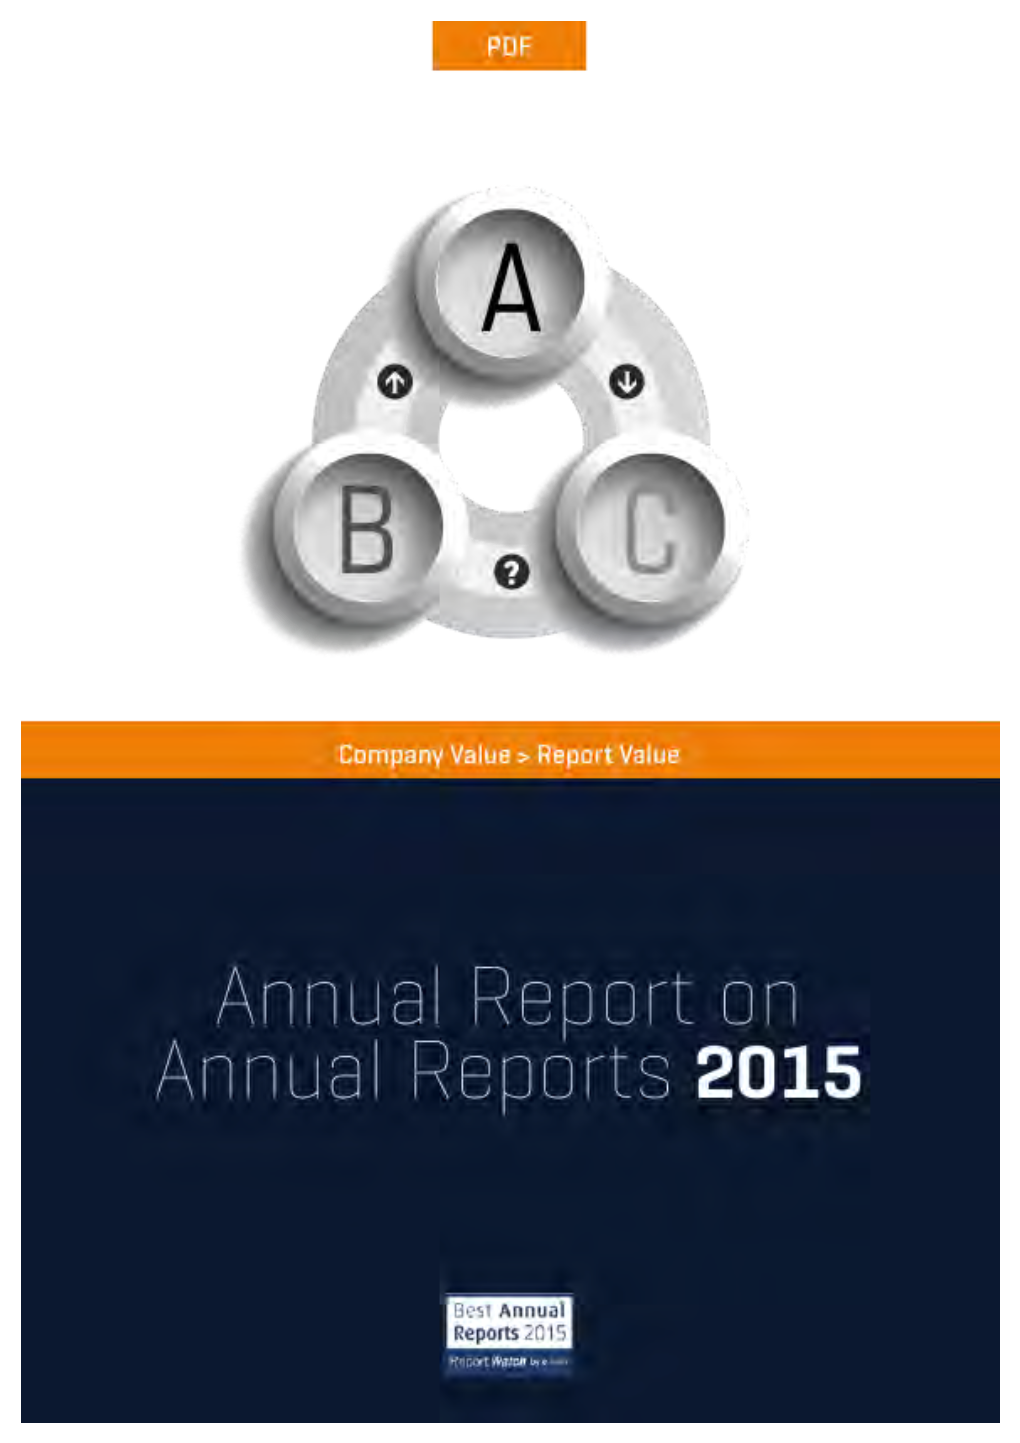 Annual Report on Annual Reports 2015